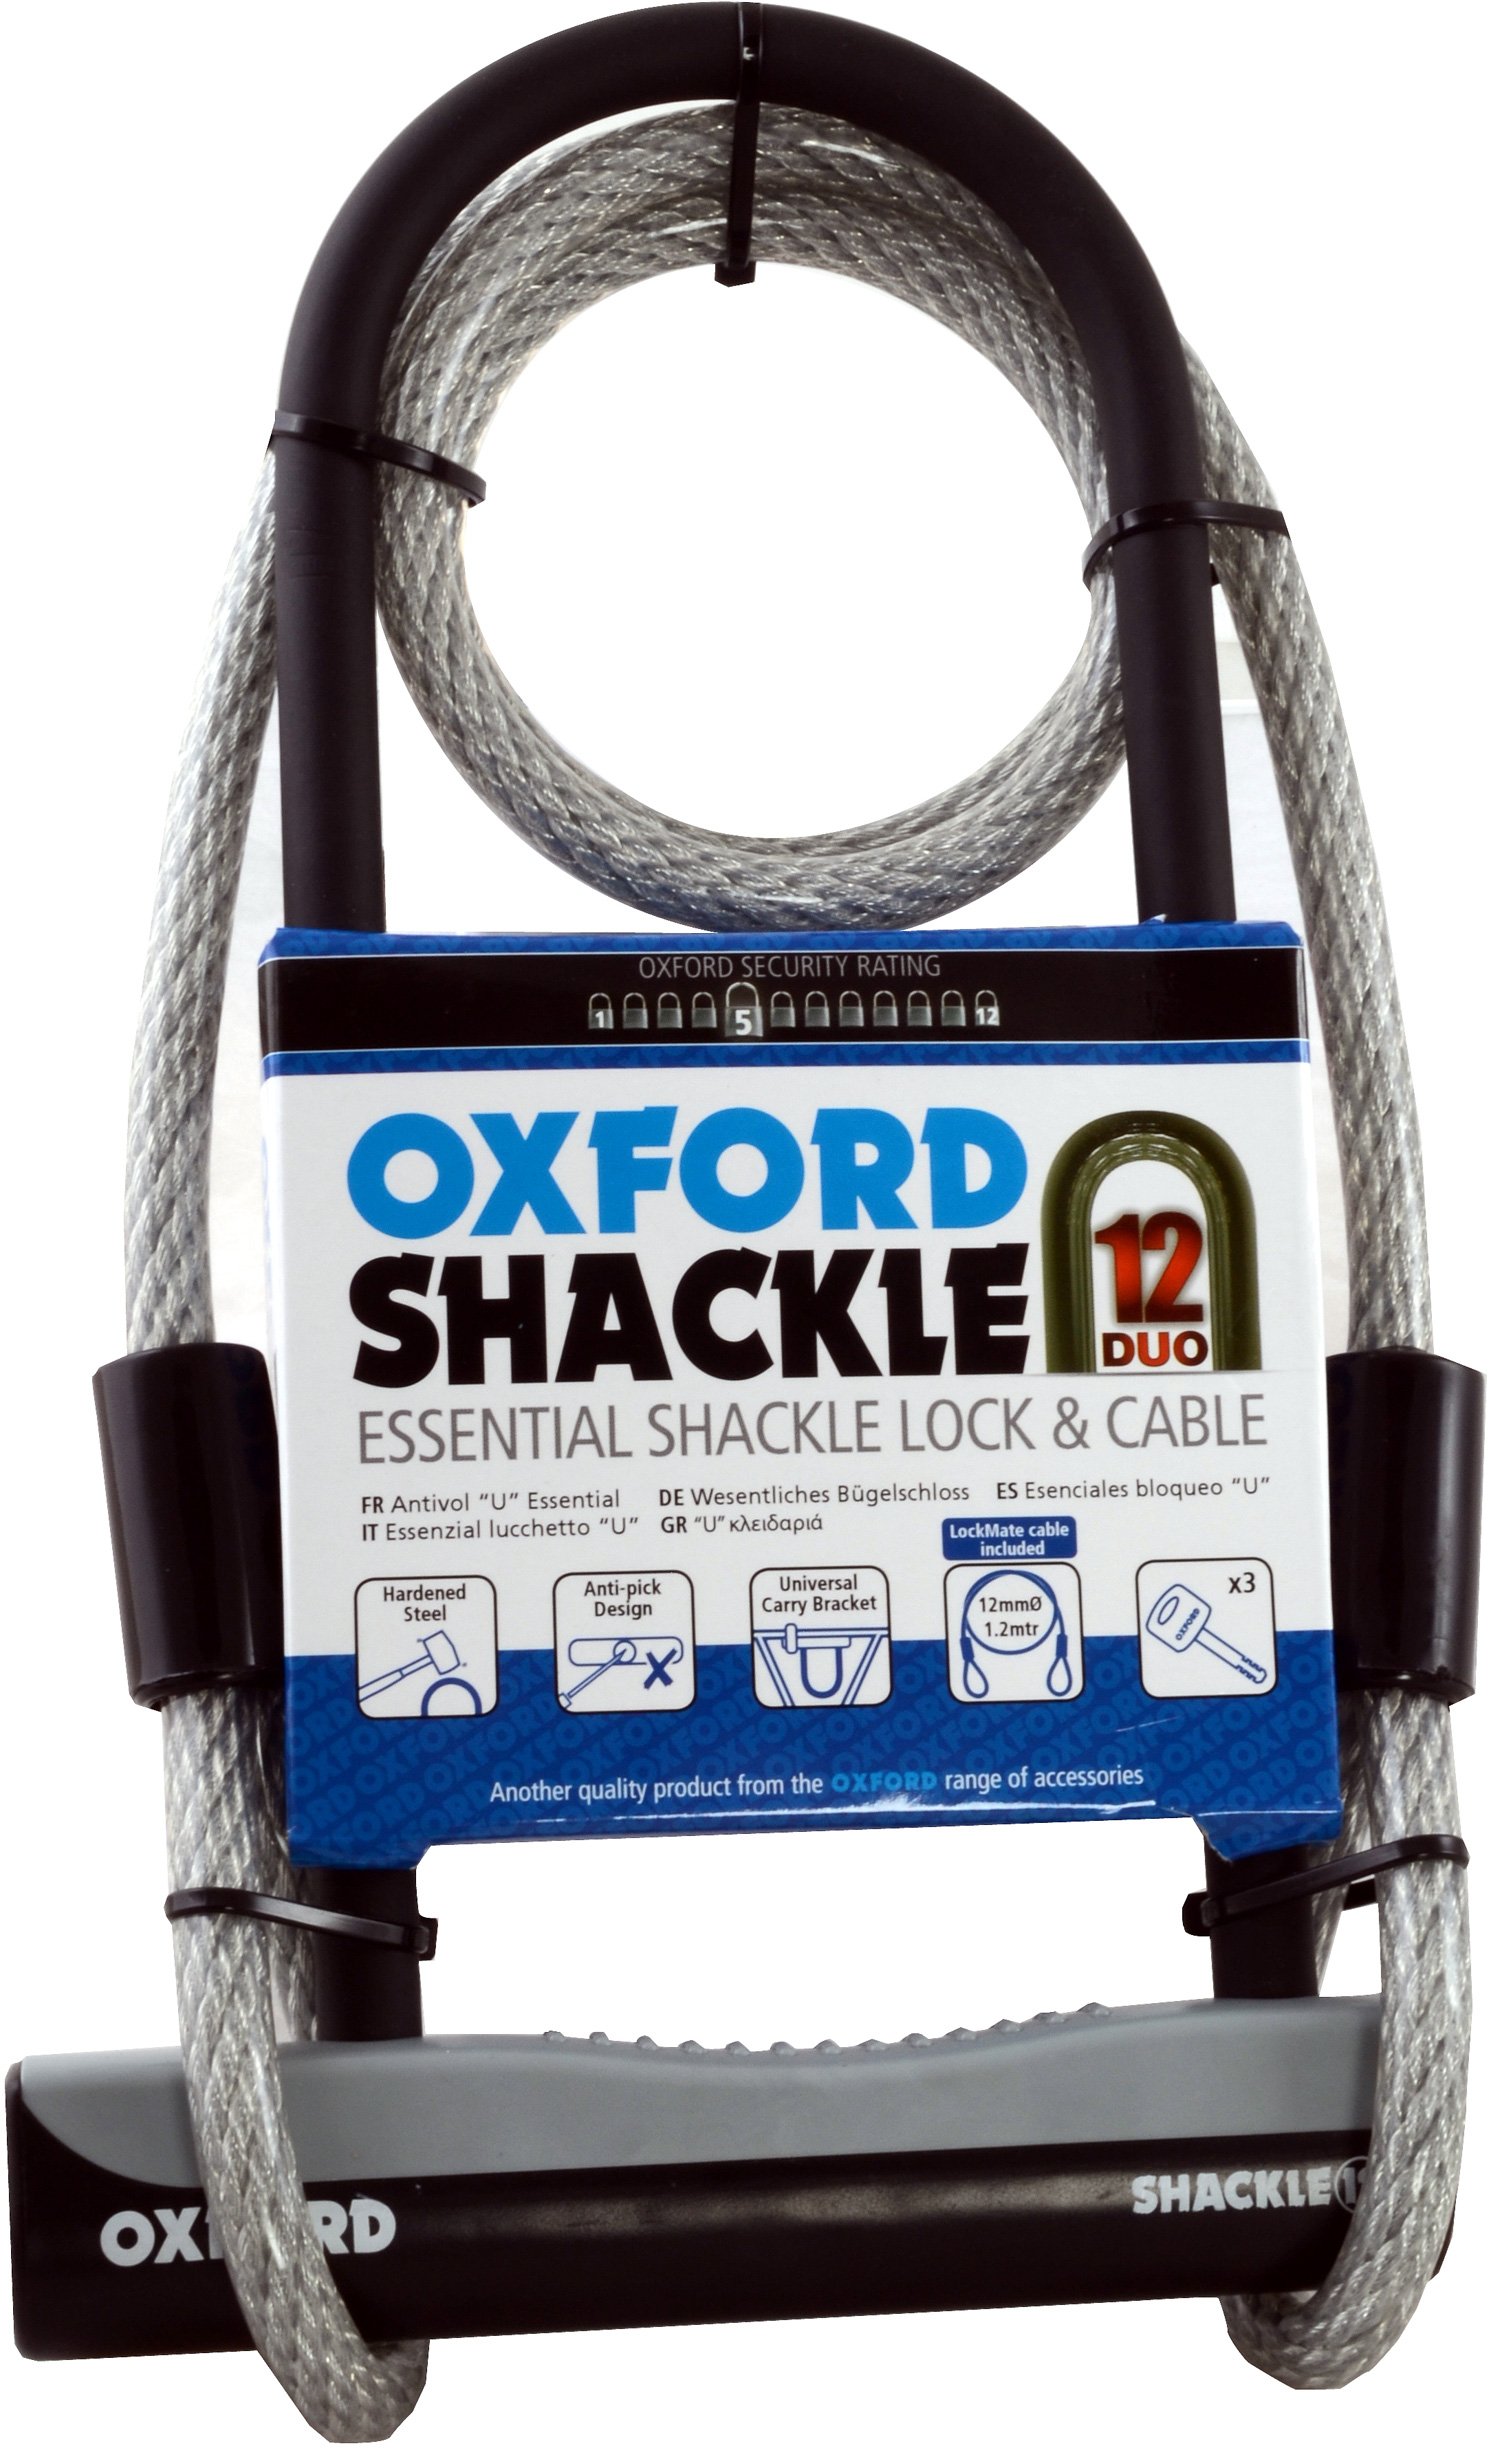 OXLK332 Oxford Shackle 12 Duo Lock & Cable